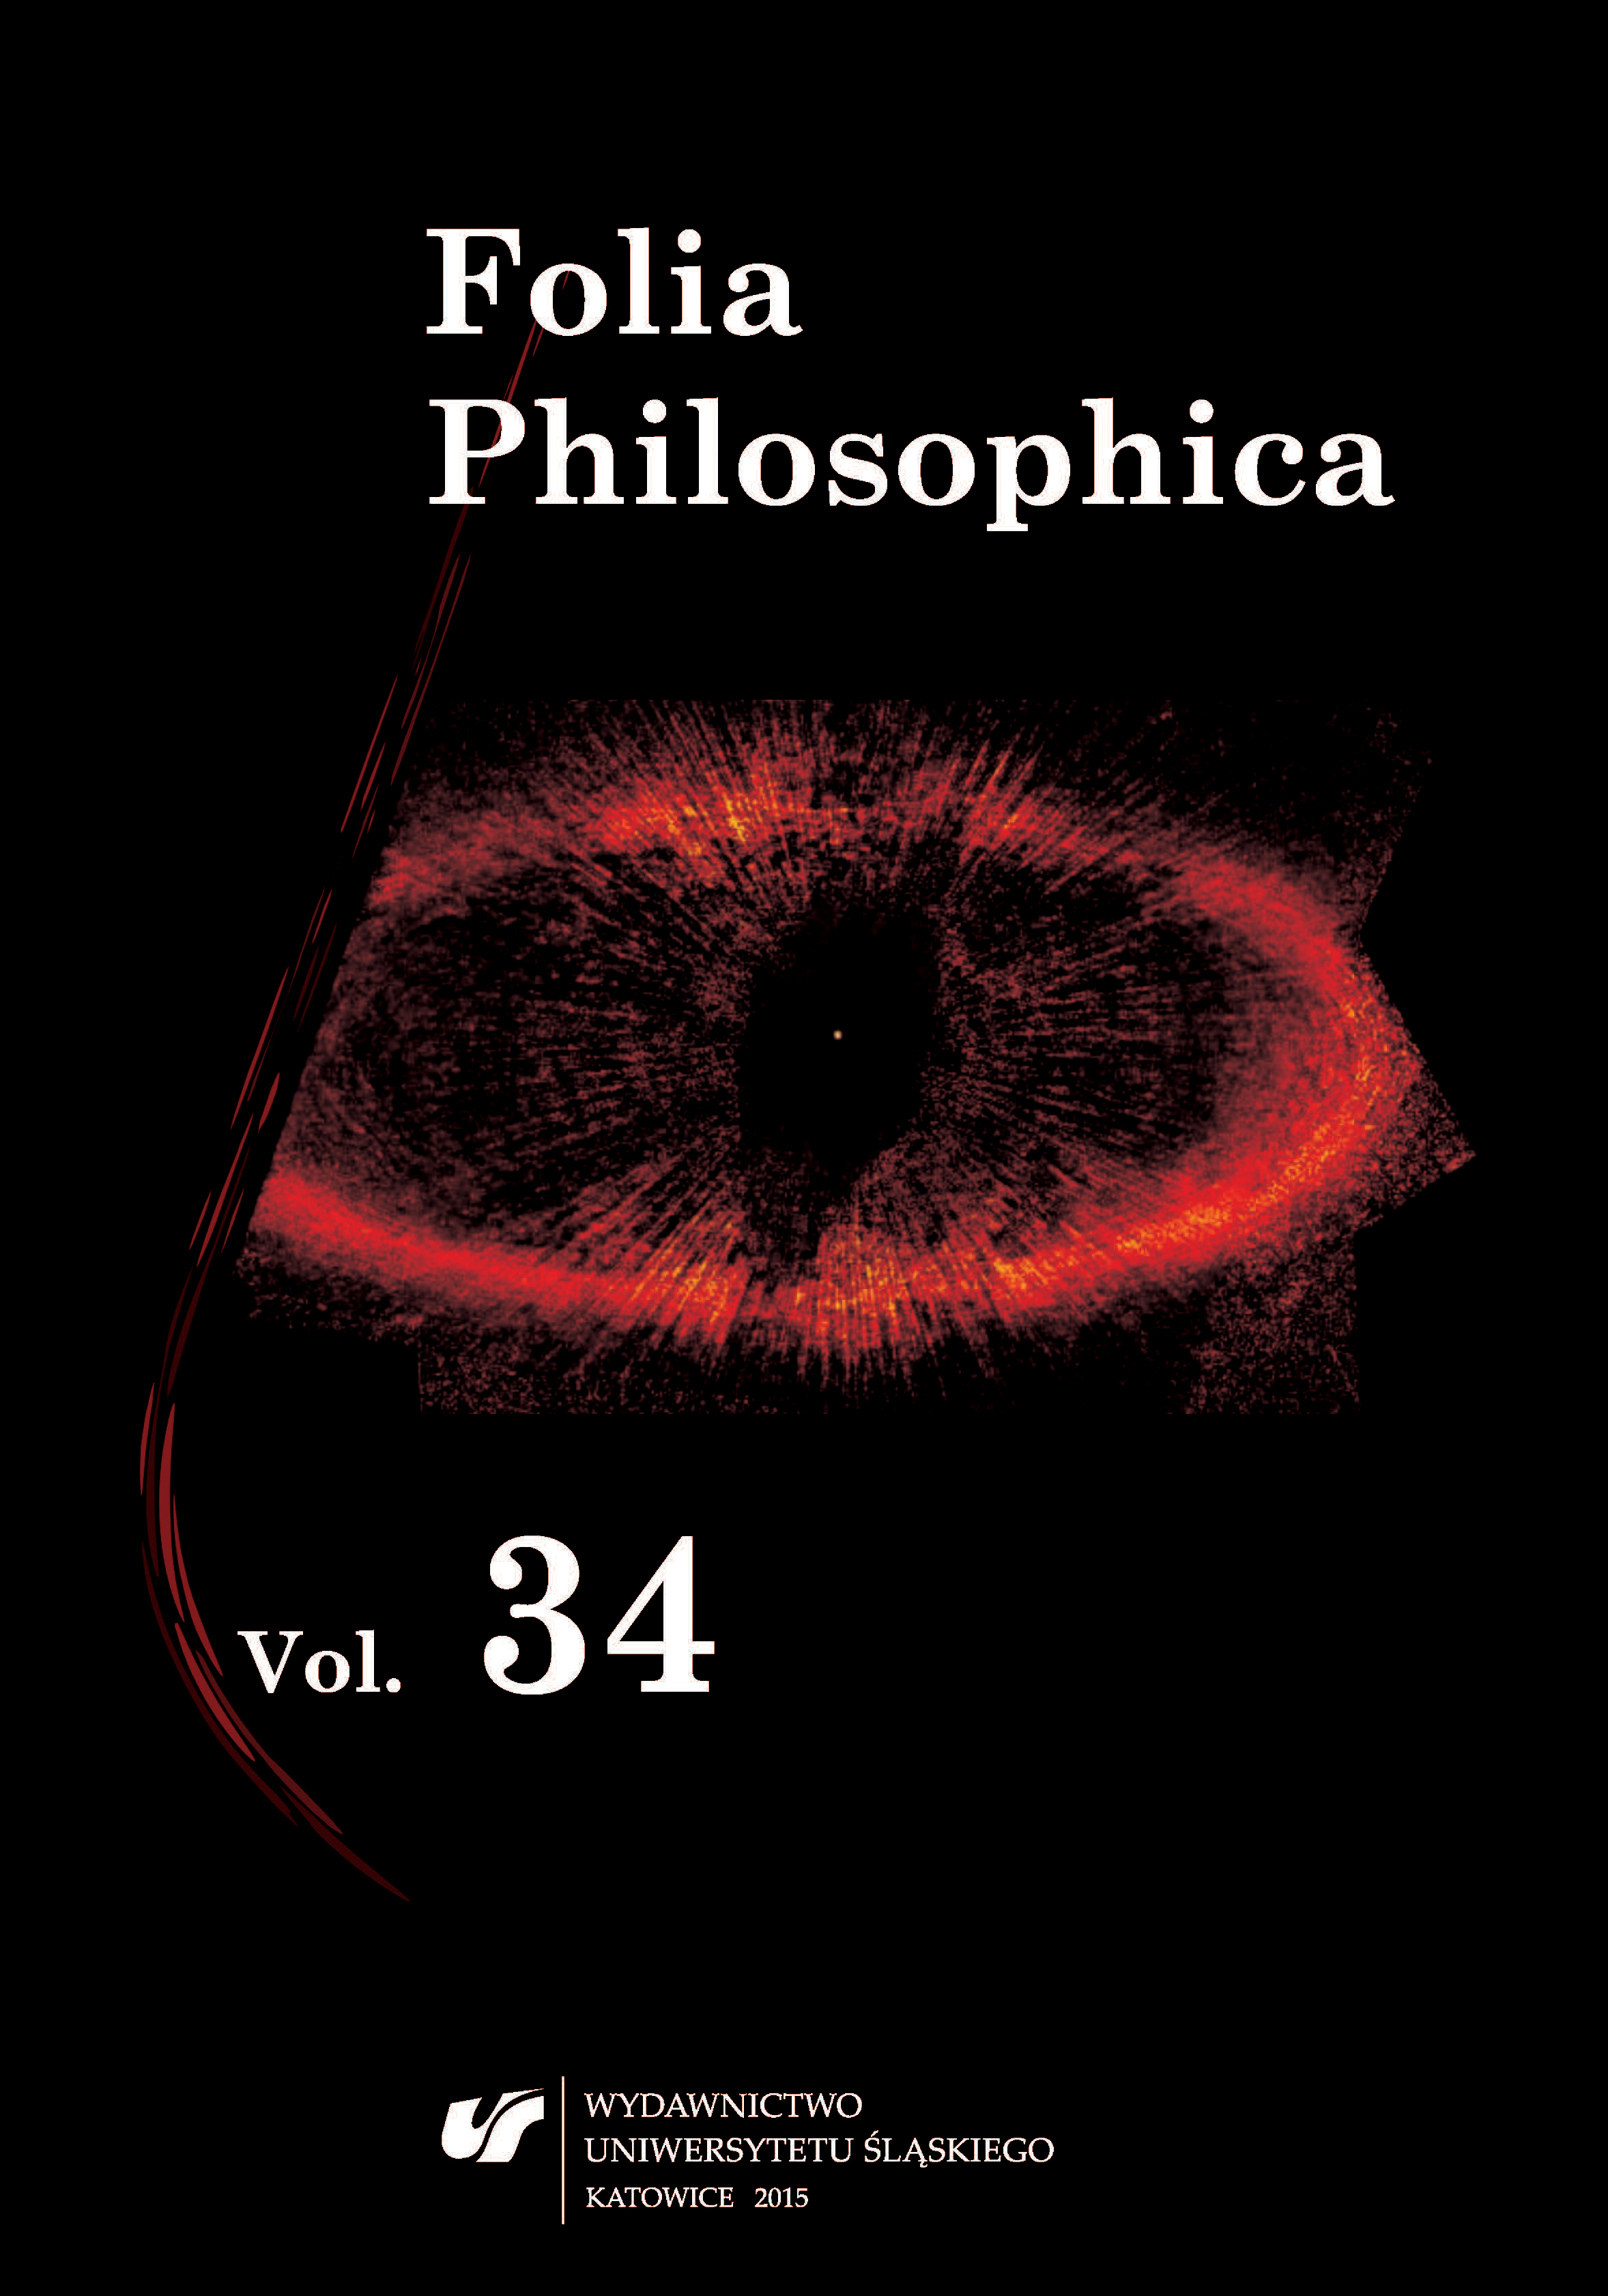 Critical Metaphysics in the Views of Otto Liebmann and Johannes Volkelt